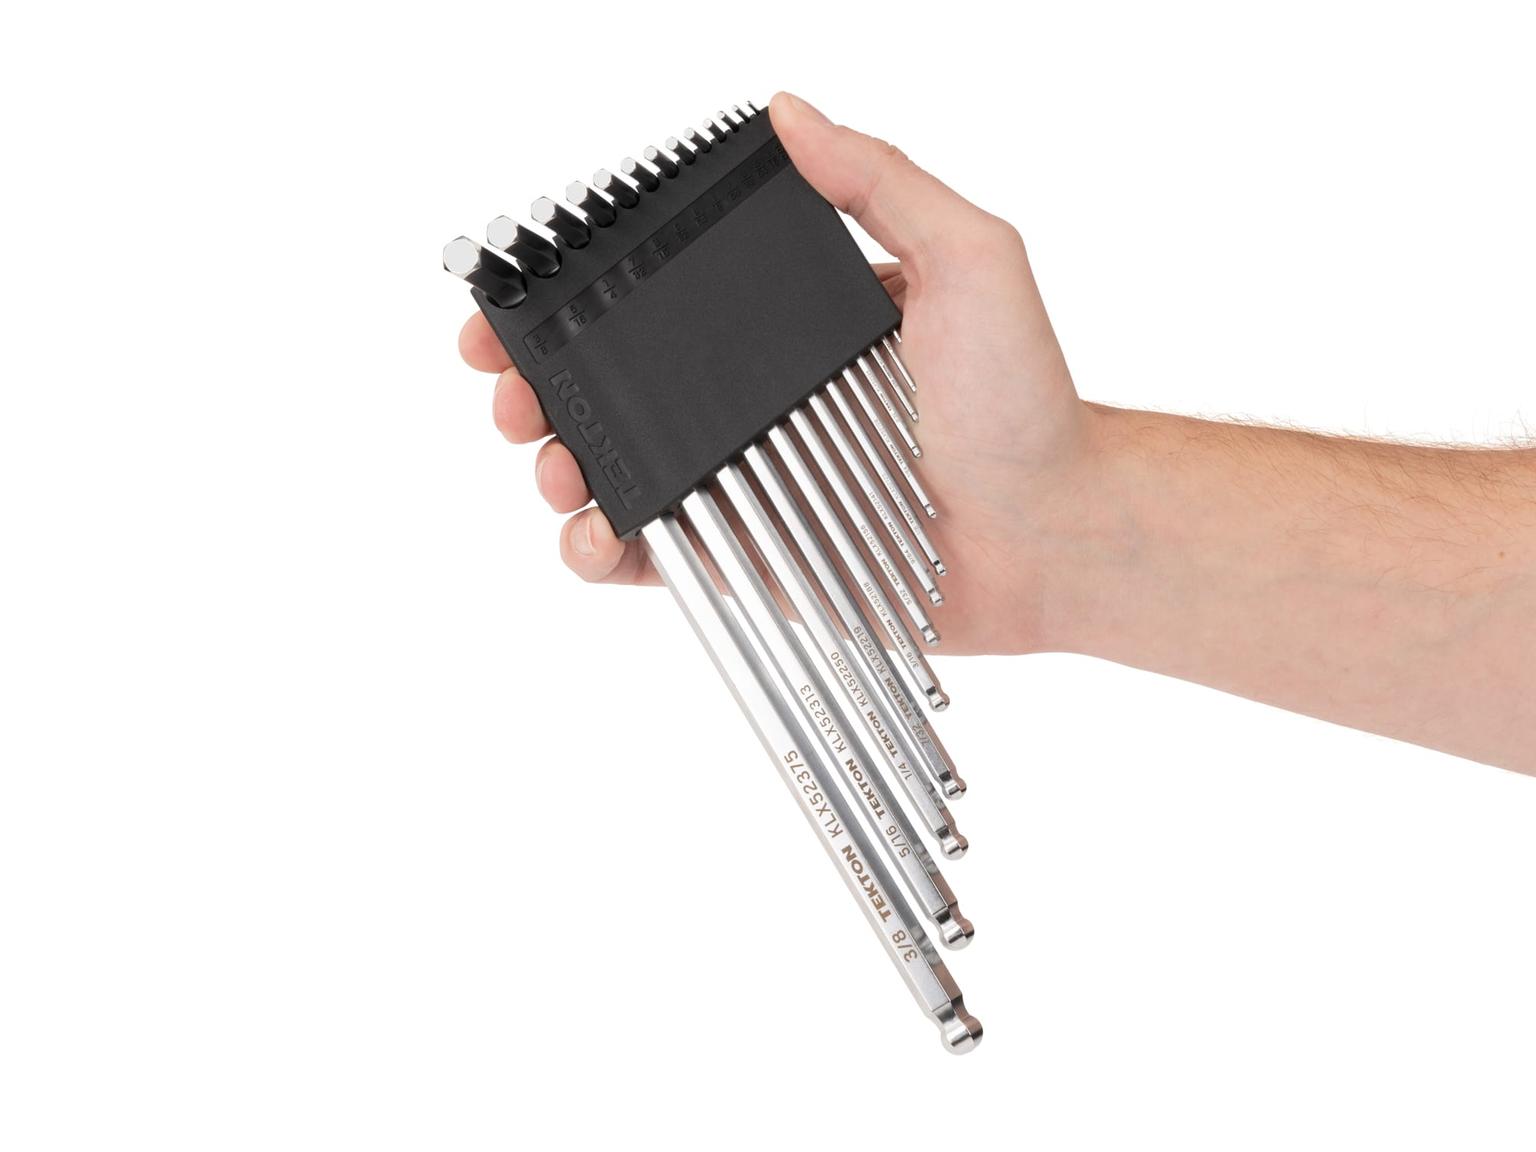 TEKTON KLX91101-D Ball End Hex Key Set with Holder, 13-Piece (0.050-3/8 in.)